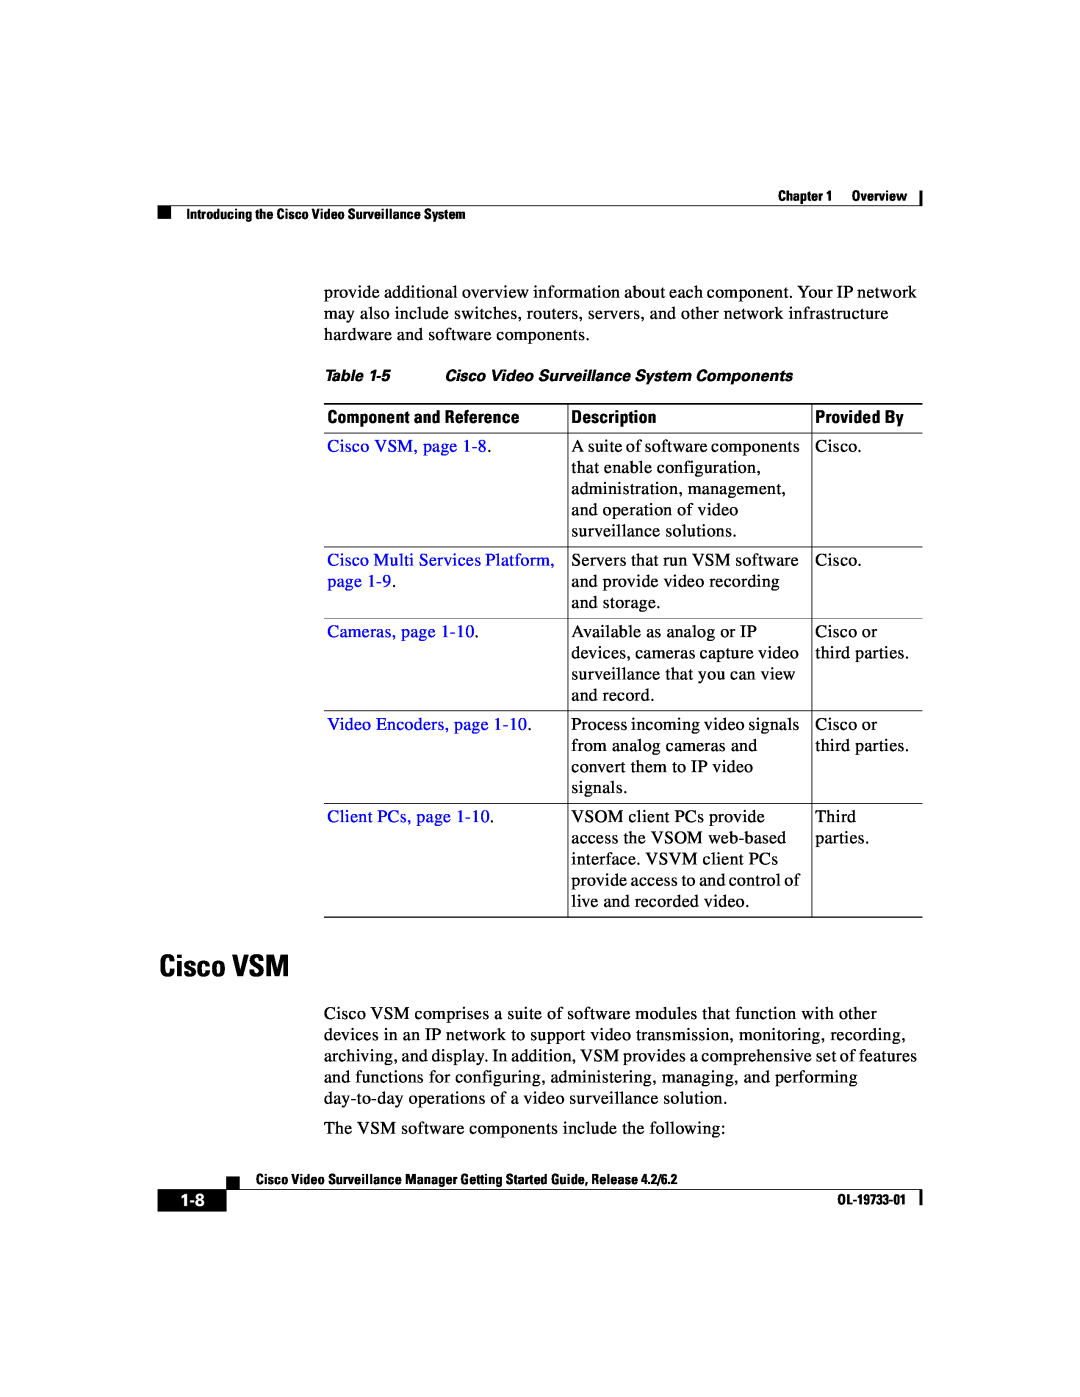 Cisco Systems 2 Component and Reference, Description, Provided By, Cisco VSM, page, Cisco Multi Services Platform 